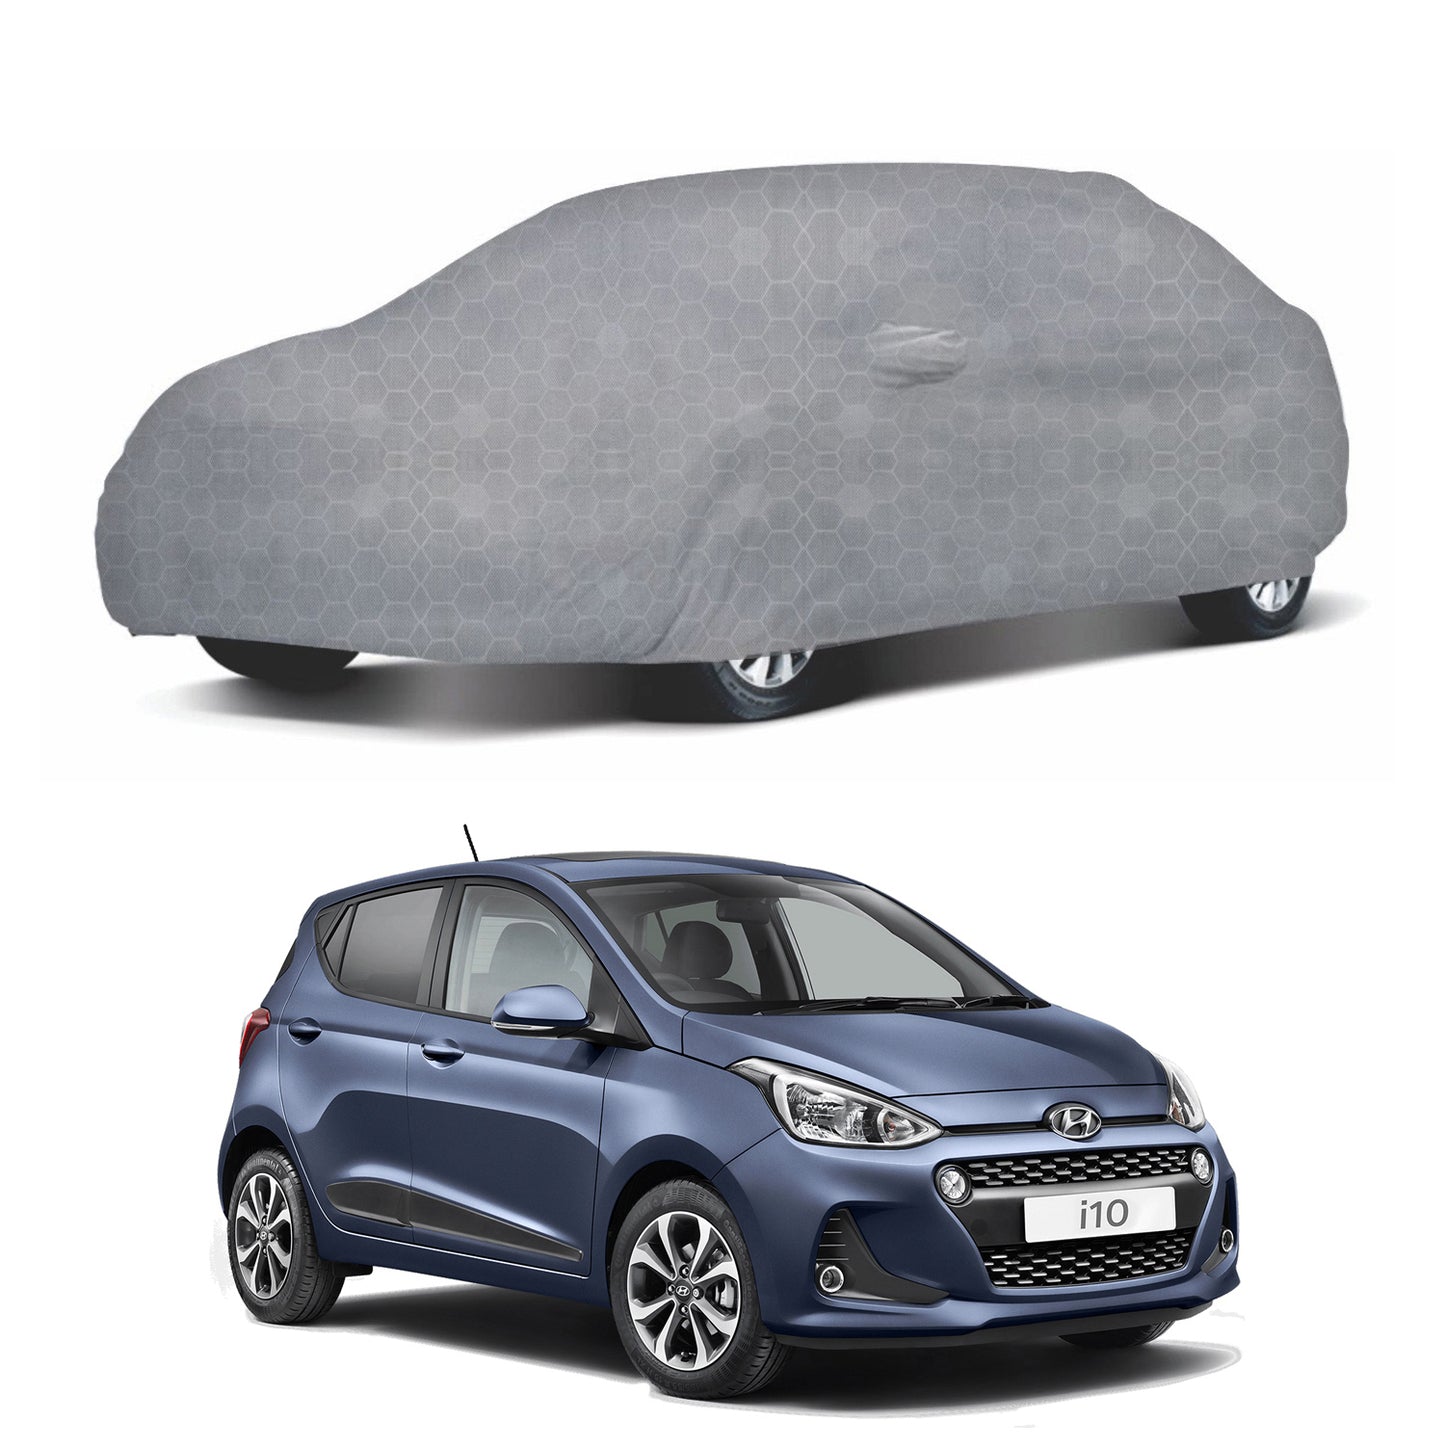 Oshotto 100% Dust Proof, Water Resistant Grey Car Body Cover with Mirror Pocket For Hyundai i10